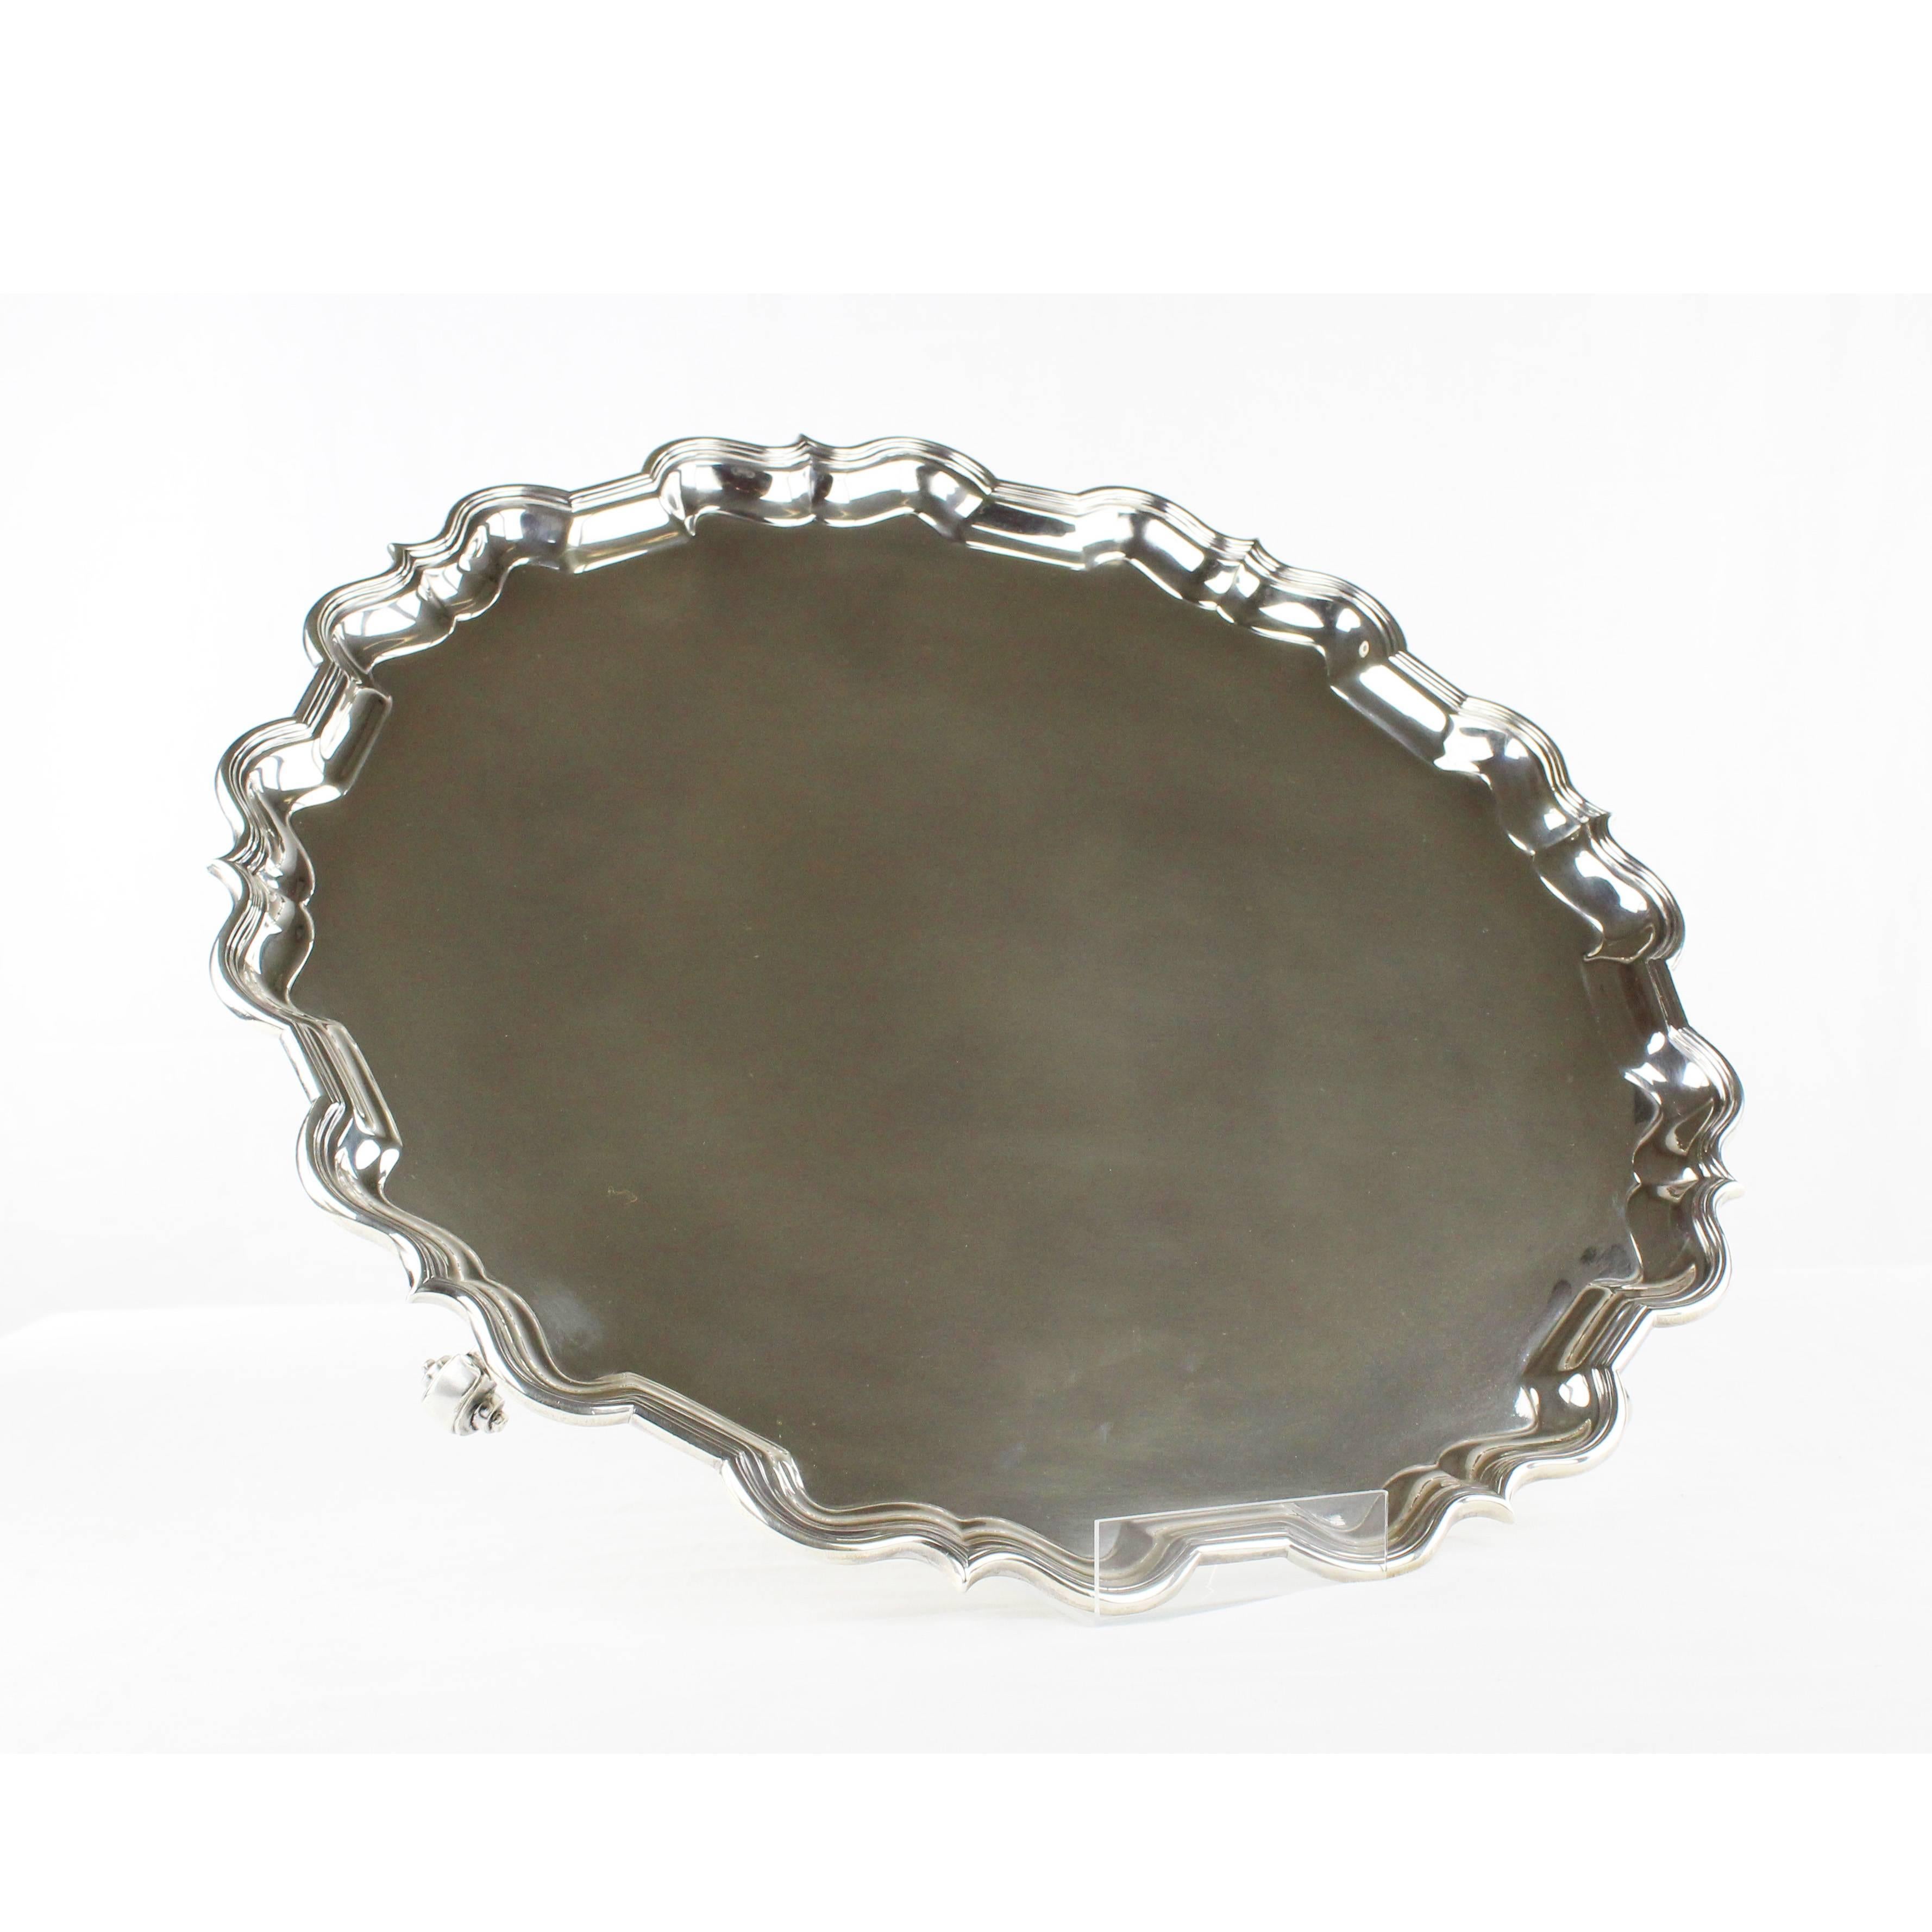 Heavy and large Sterling silver tray
England, London 1930
Three small state feet
925 sterling silver, hallmarked
Height 4.7 cm, diameters ca. 45 cm

Delivery can be made to your door within 7 days worldwide. We already delivered to Asia, US and a